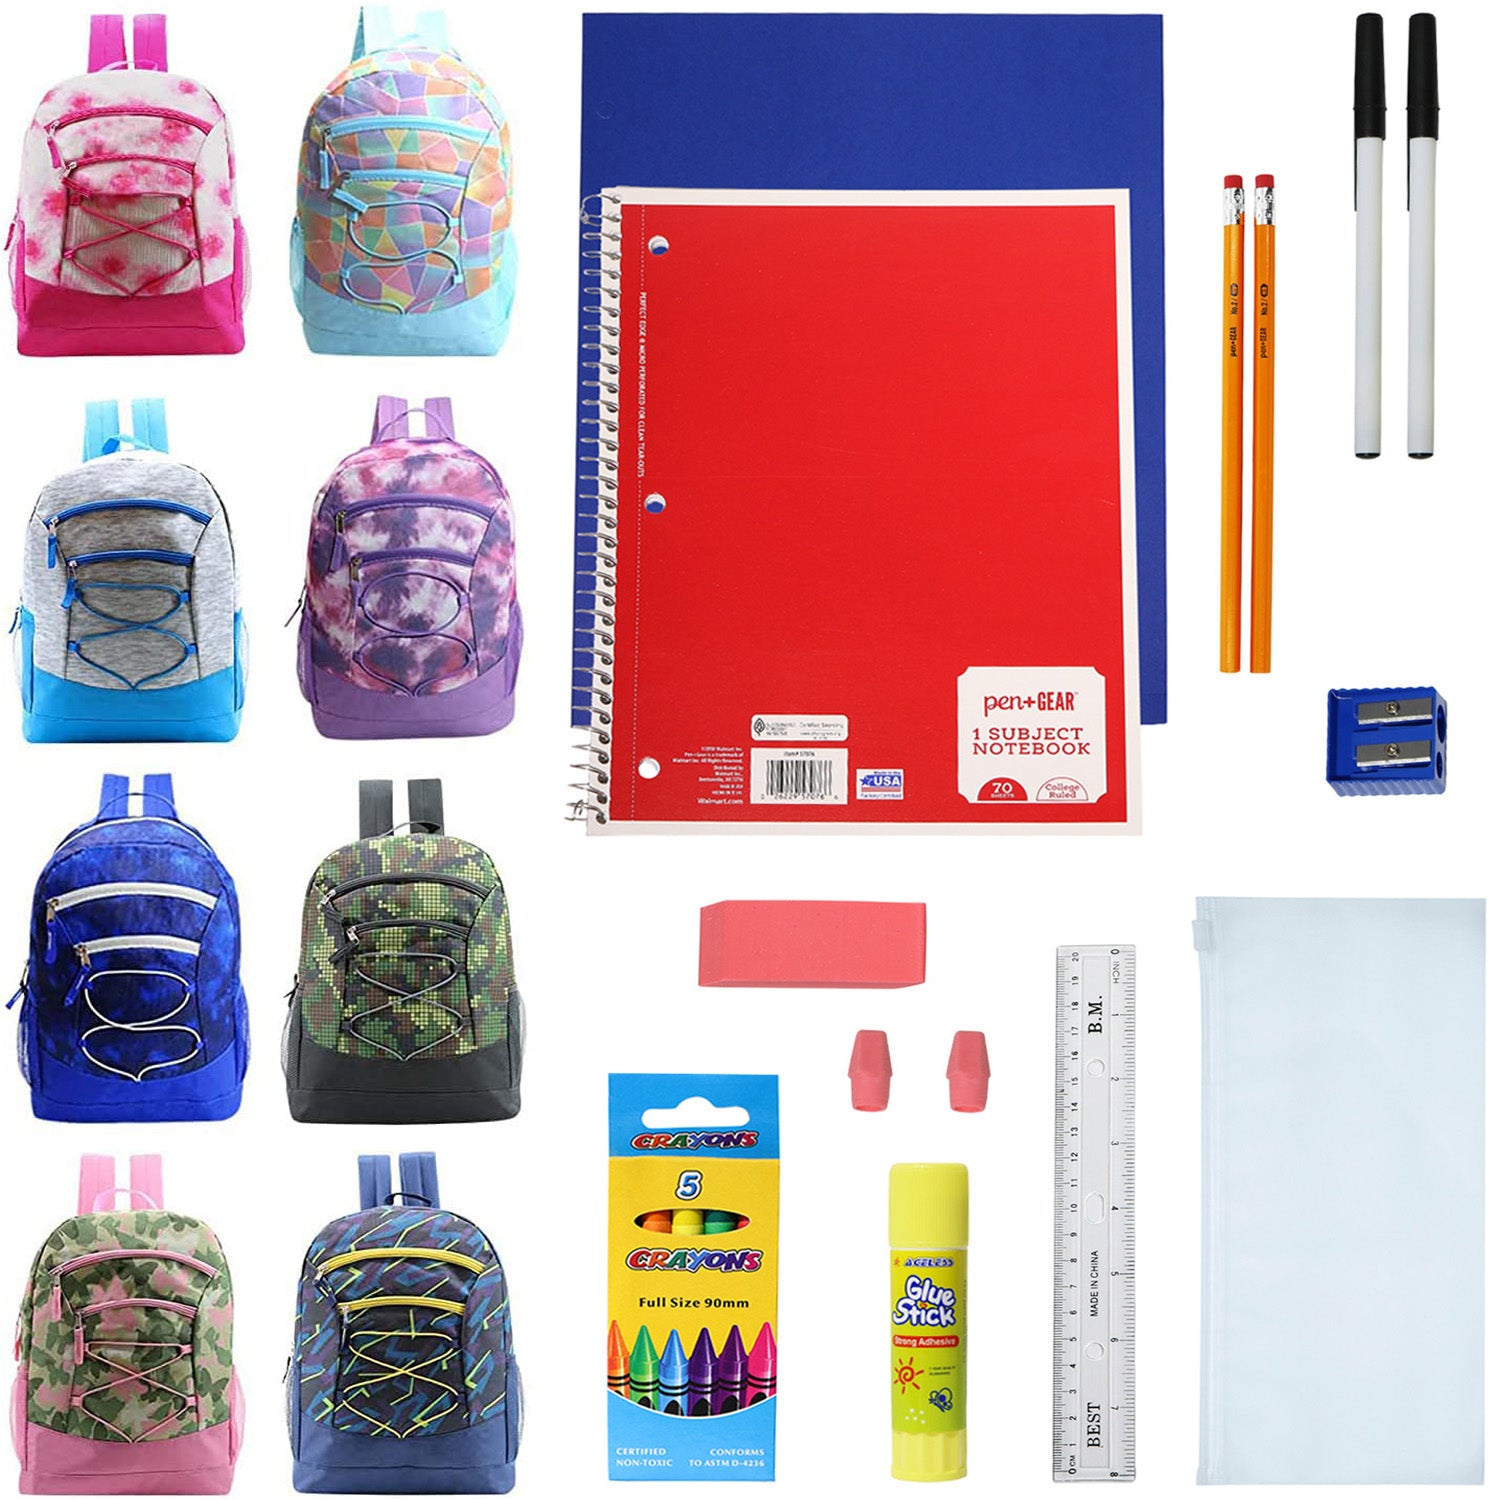 18 Piece Wholesale Bungee School Supply Kit With 17" Backpack - Bulk Case of 8 Backpacks and Kits